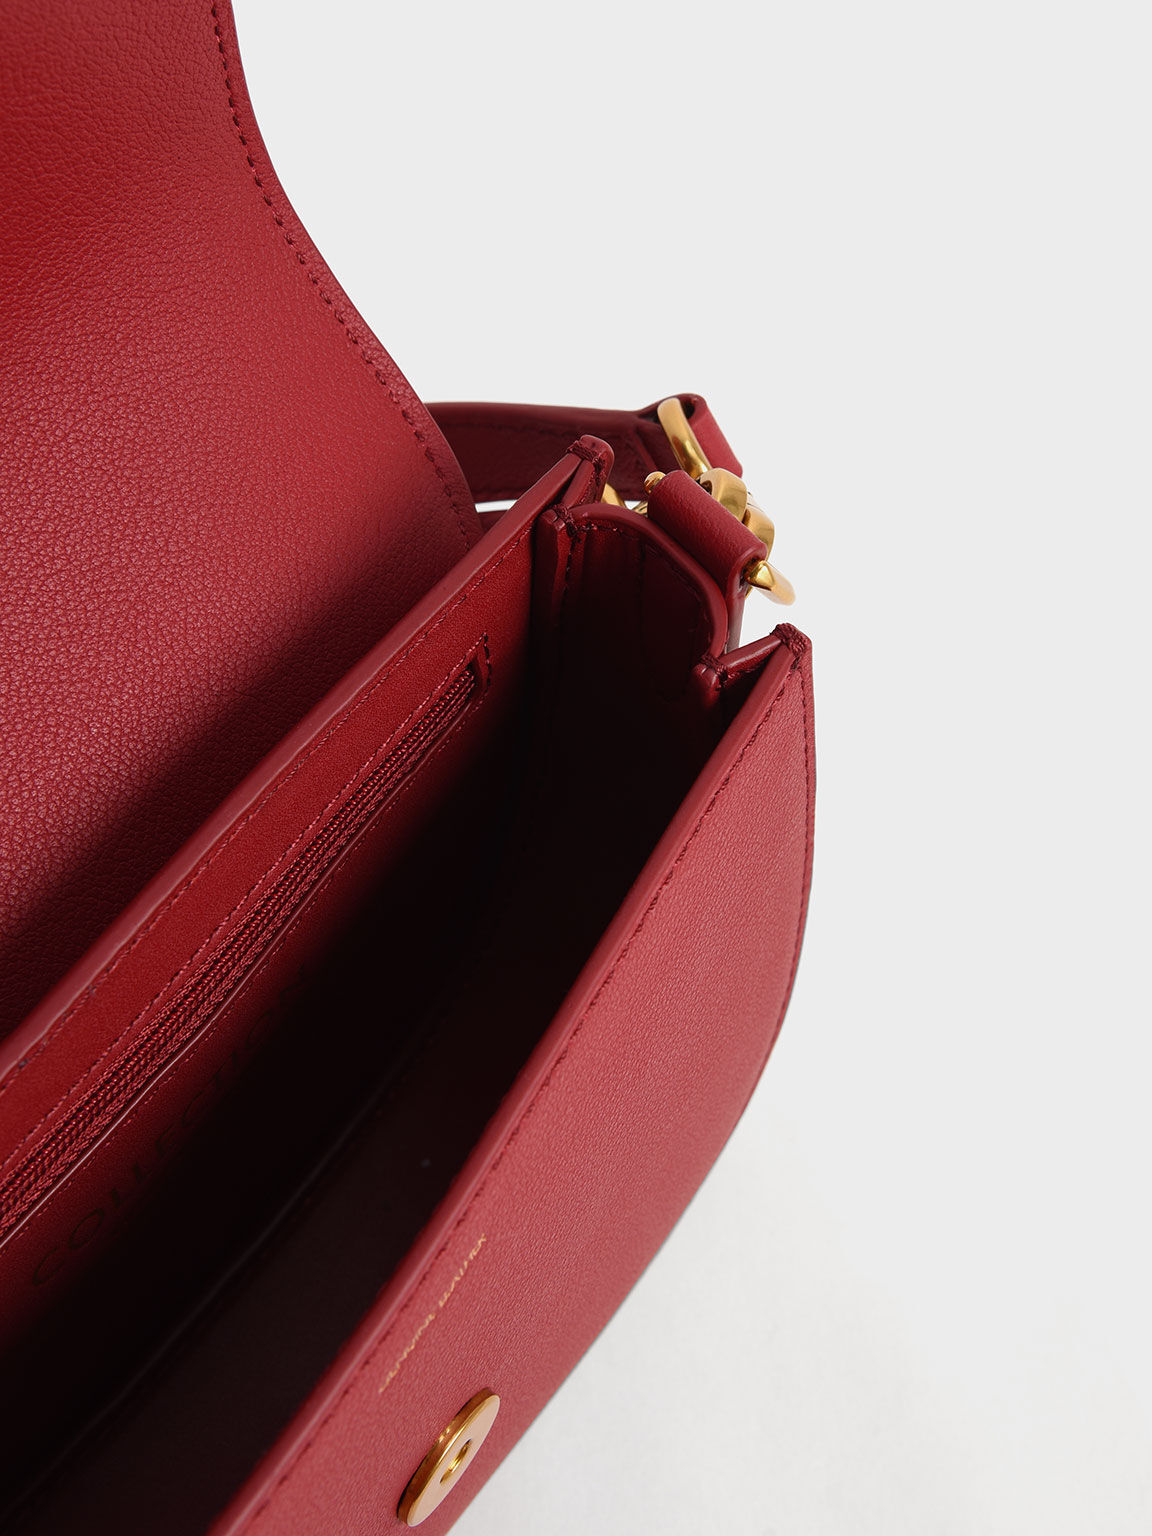 Lunar New Year Collection: Mini Gabine Leather Saddle Bag, Red, hi-res